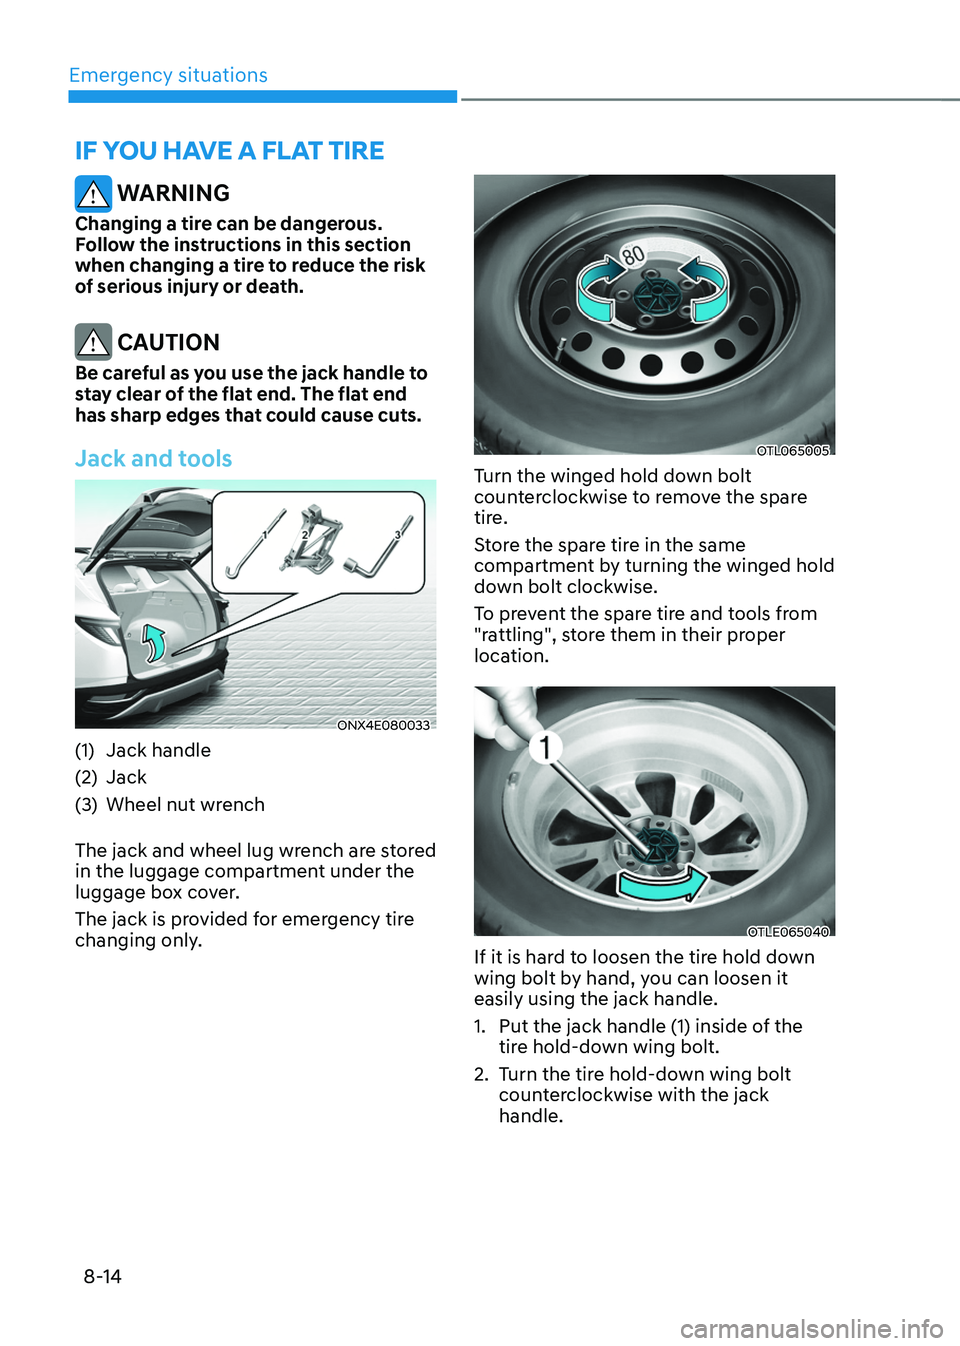 HYUNDAI TUCSON 2022  Owners Manual Emergency situations
8-14
IF YOU HAVE A FLAT TIRE
 WARNING
Changing a tire can be dangerous. 
Follow the instructions in this section 
when changing a tire to reduce the risk 
of serious injury or dea